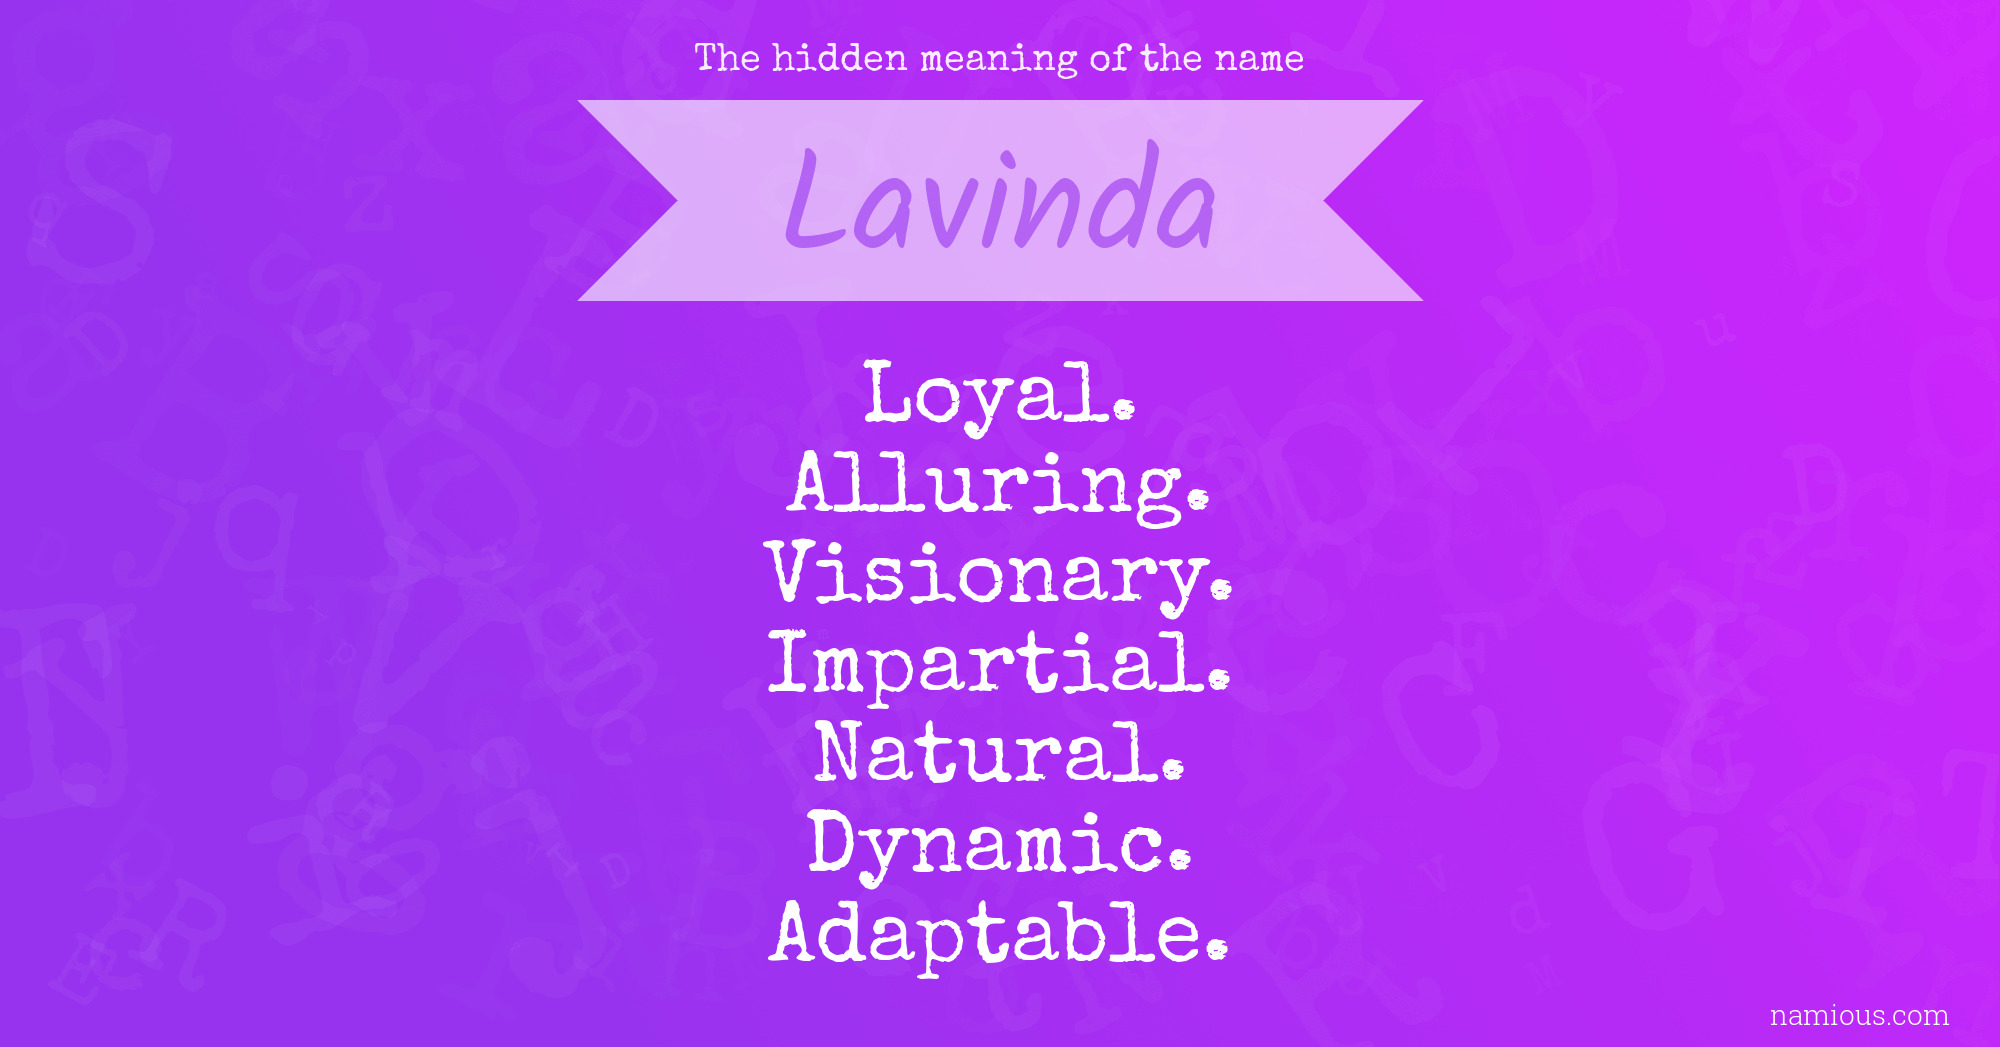 The hidden meaning of the name Lavinda